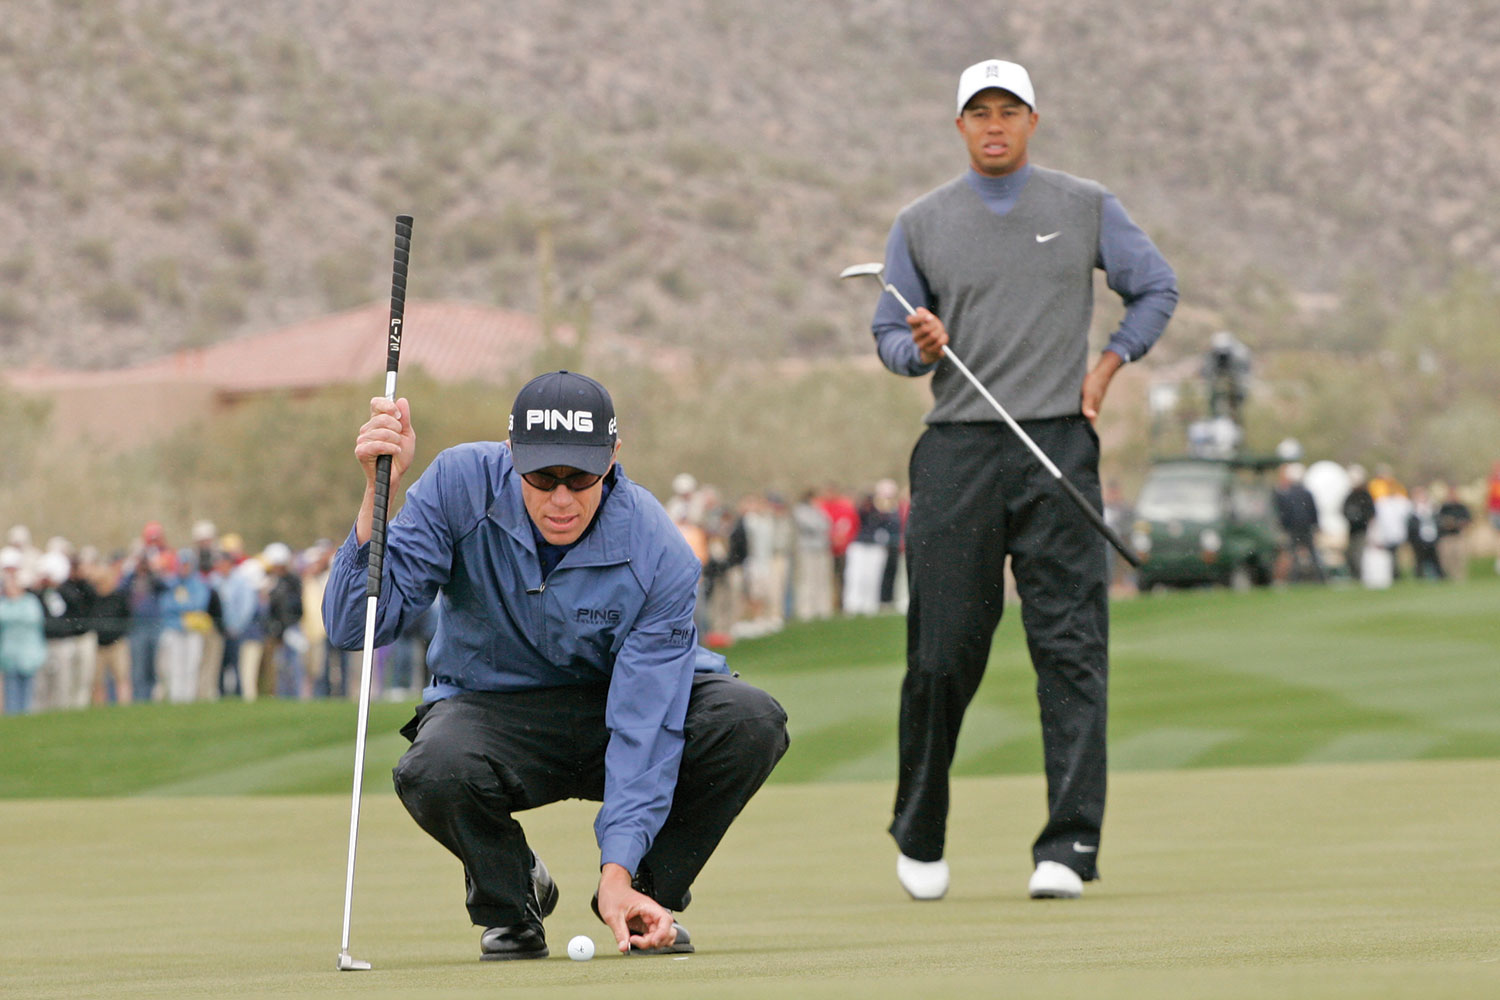 Beating Tiger Woods at the 2007 WGC–Match Play was a triumph of grit over greatness.